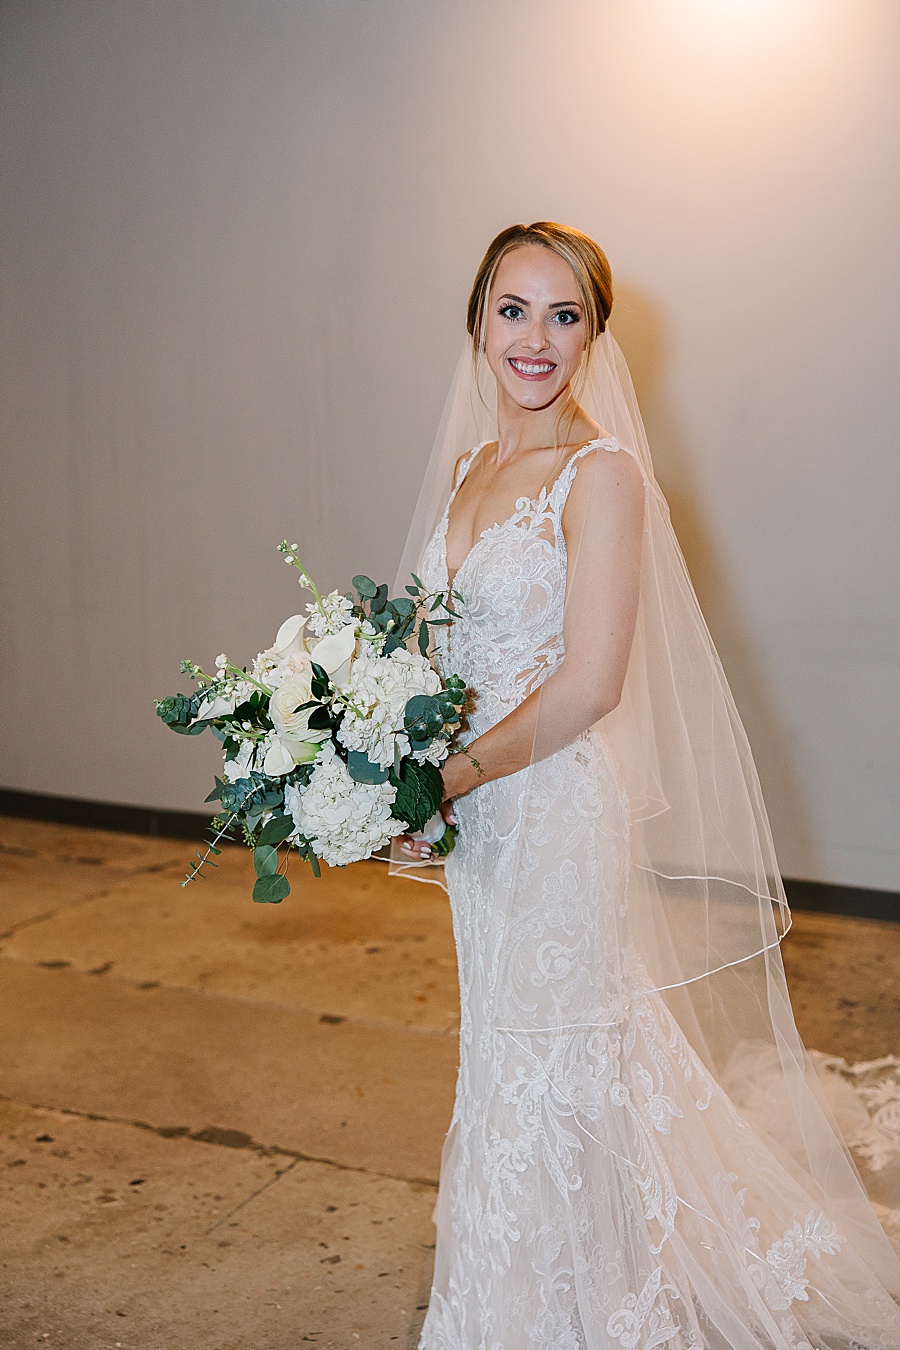 Bride with lace dress and veil and bouquet getting ready at Jackson Terminal in Knoxville TN by Mandy Hart Photo, Knoxville TN Wedding Photographer